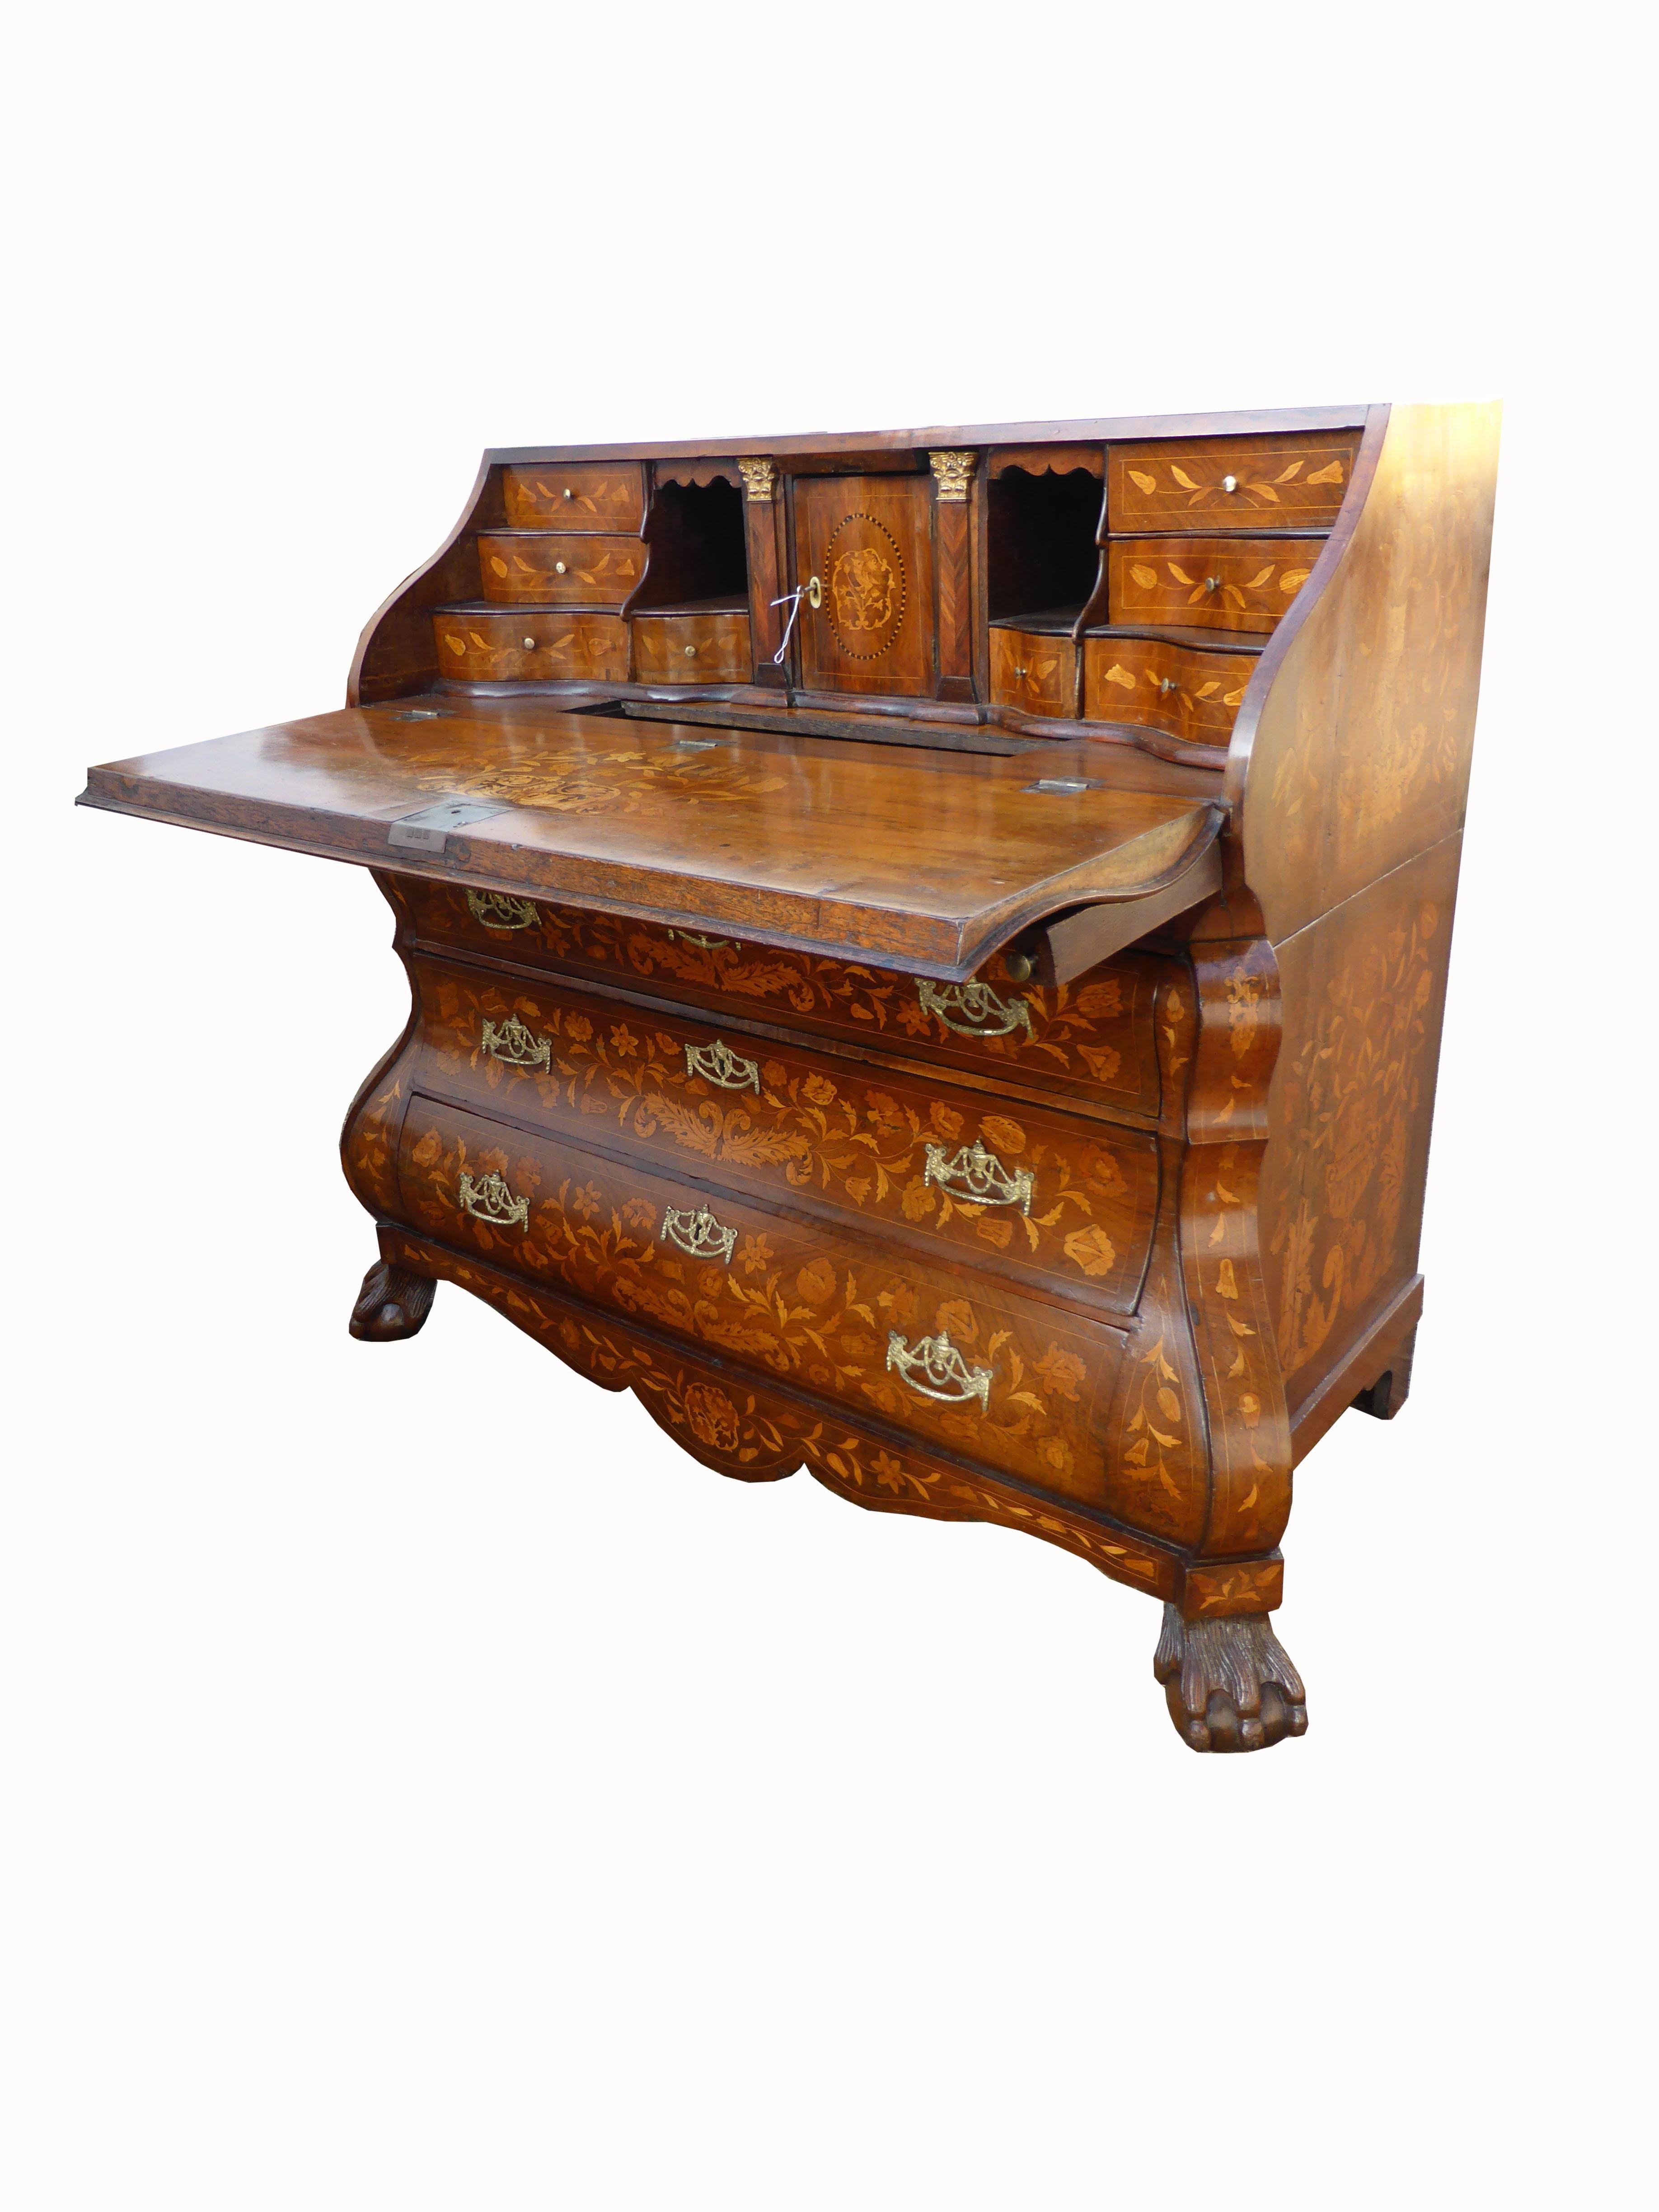 For sale is a top quality late 18th century Dutch Marquetry Bureau. The bureau is profusely inlaid all over with various birds and flowers, butterflies etc. The fall front opens to reveal a nicely fitted interior including various drawers and pigeon